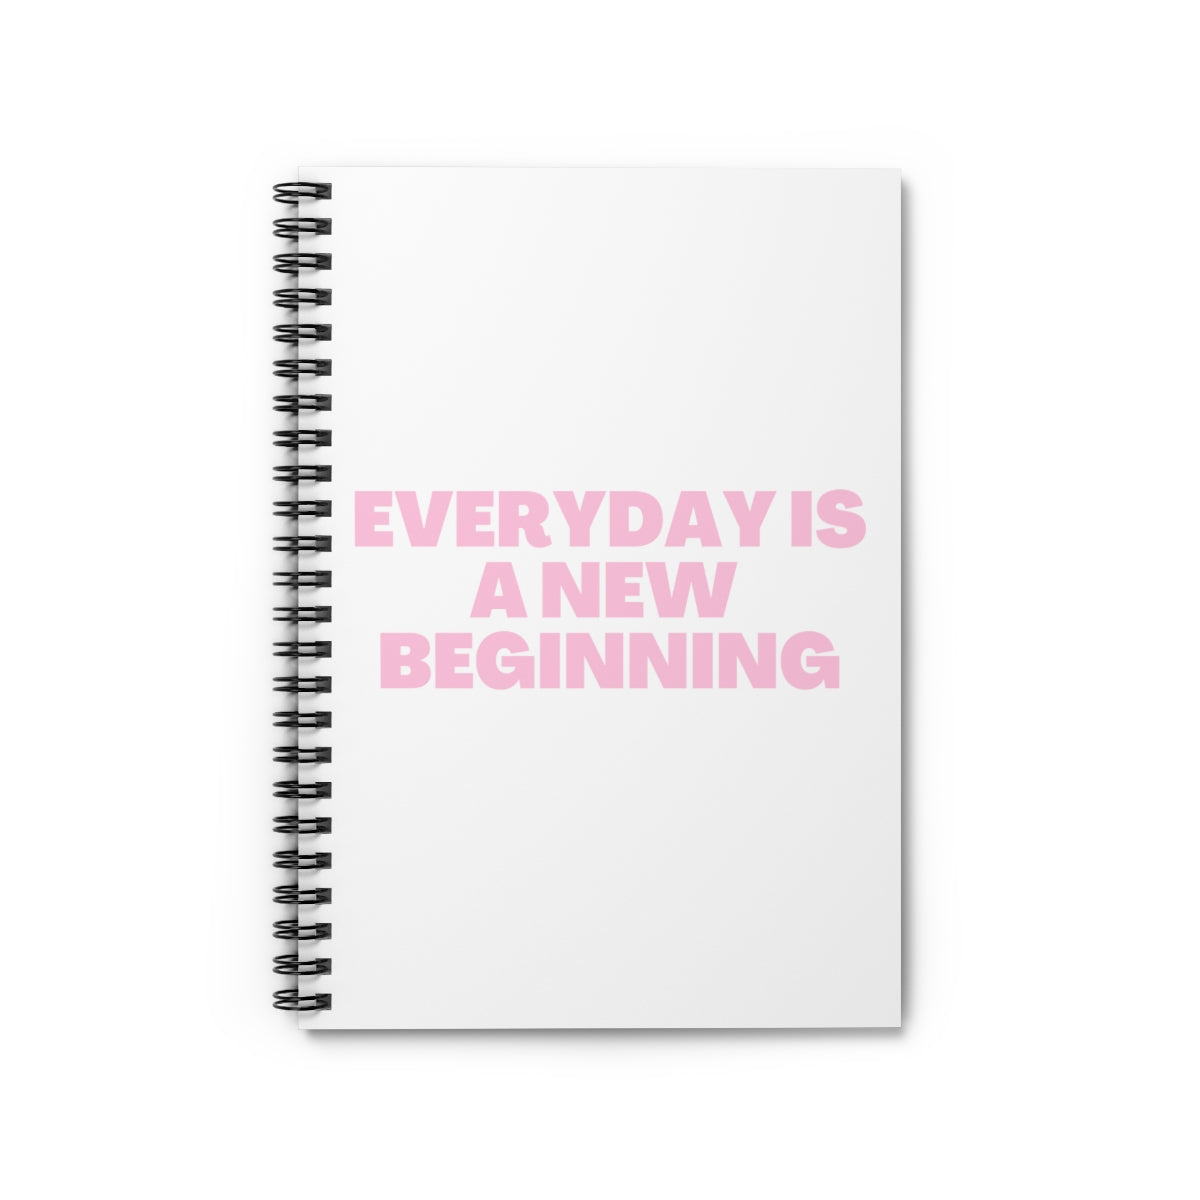 Everyday Is A New Beginning Motivational Durable Journal- Motivational Notebook, Inspirational Notebooks, Women’s Inspirational Journal, Self-Care Gift for Friends, Daily Motivational Journal